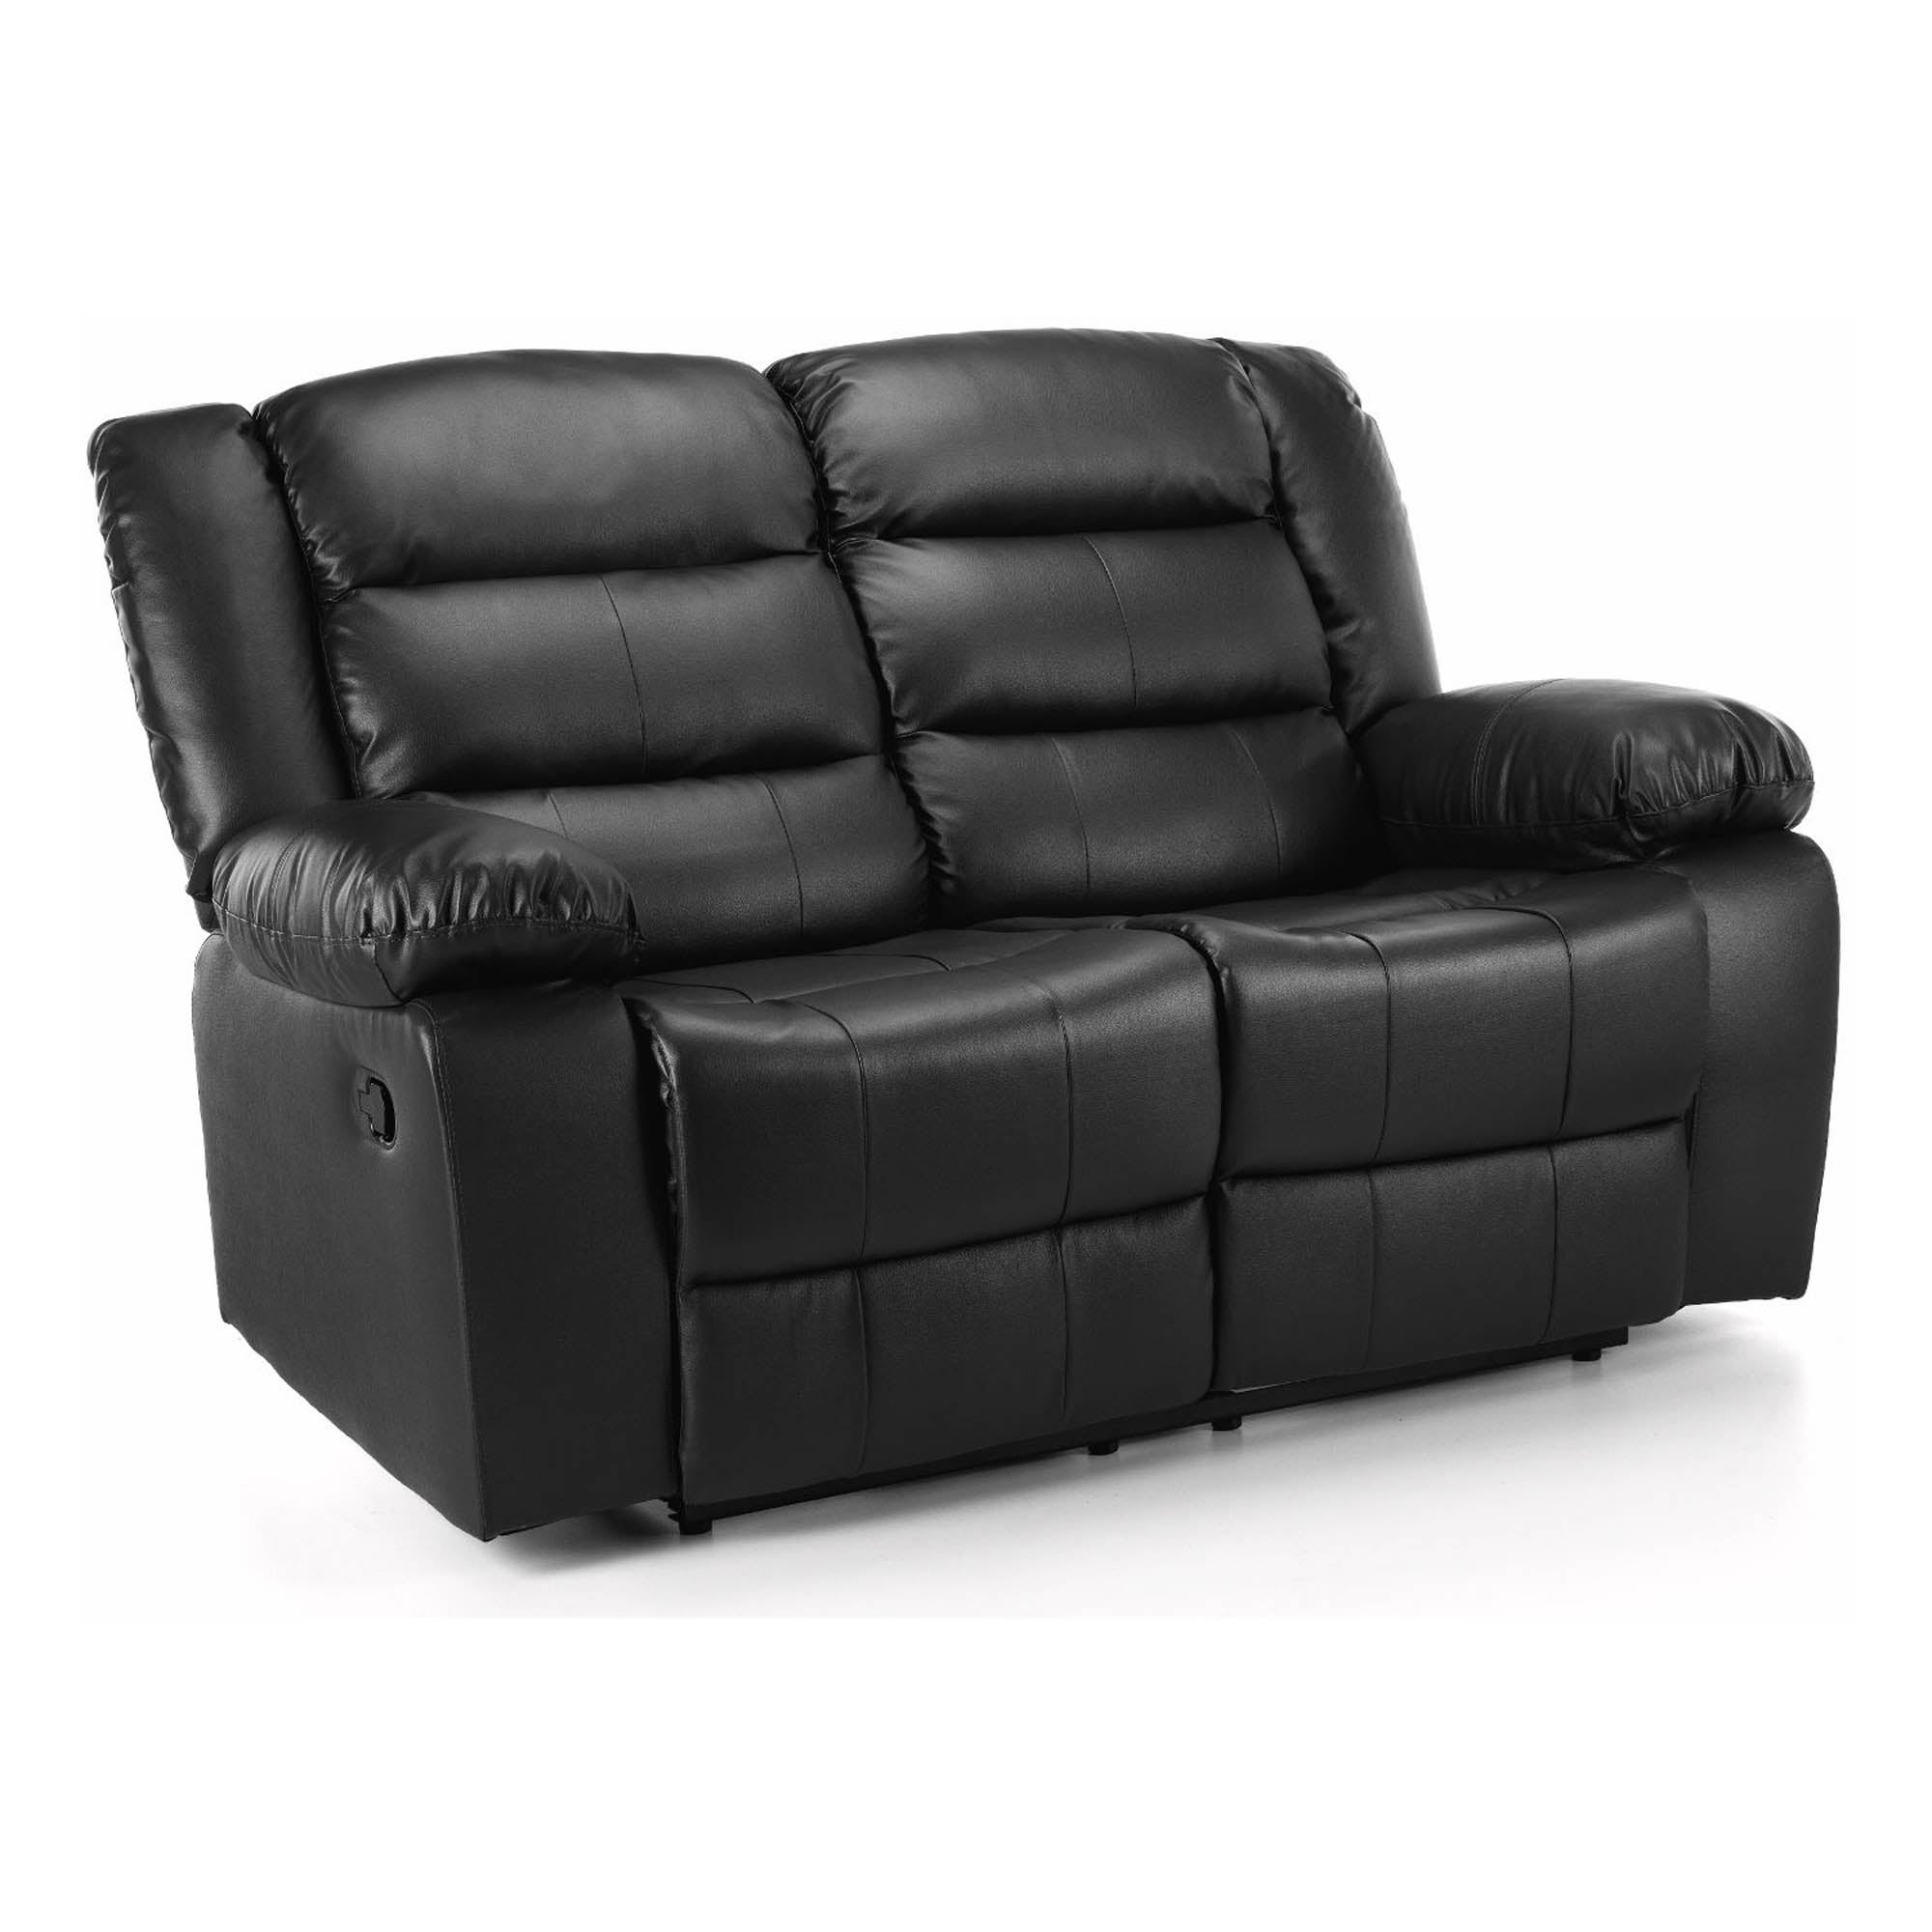 seater sofa leather whitfield reclining dunelm